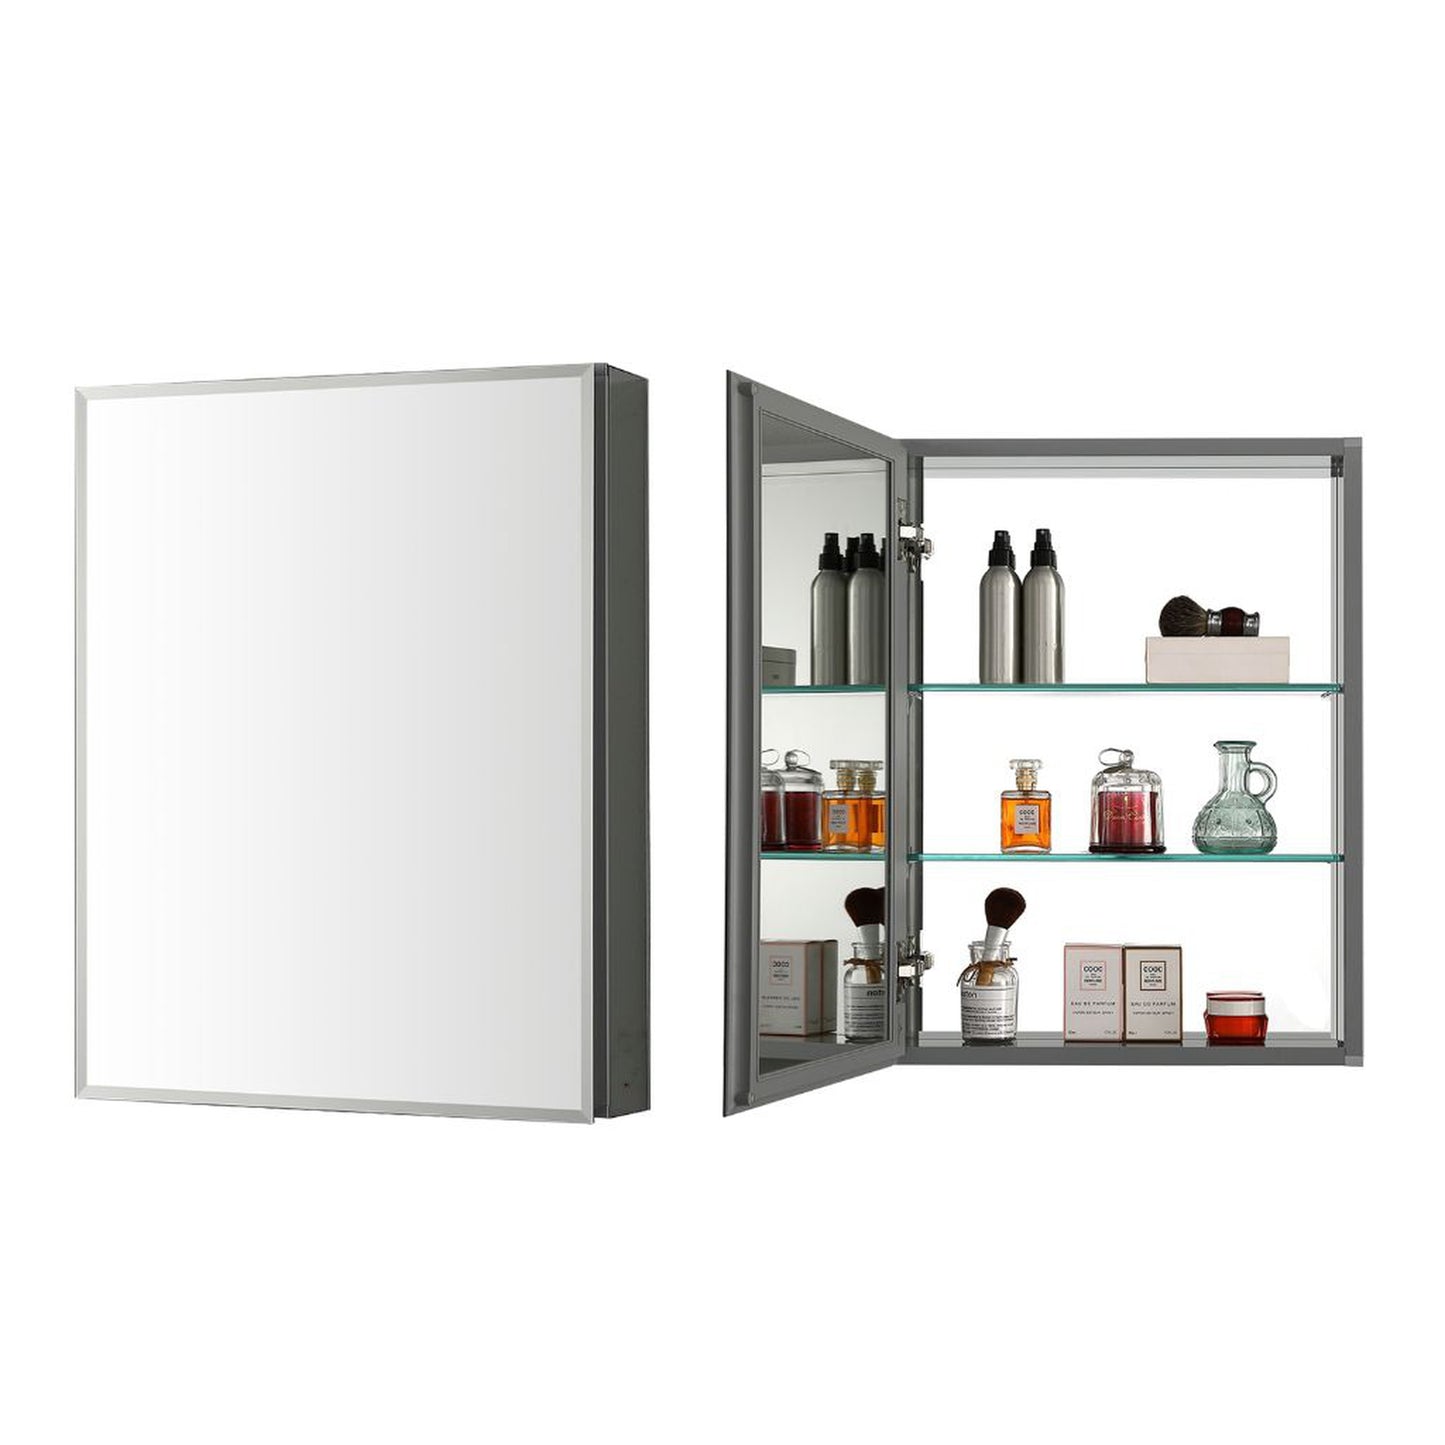 Blossom MC8 16" x 20" Recessed or Surface Mount Left or Right-Hand Swing Door Aluminum Medicine Cabinet With Mirror, Adjustable Hinges and Adjustable Glass Shelves